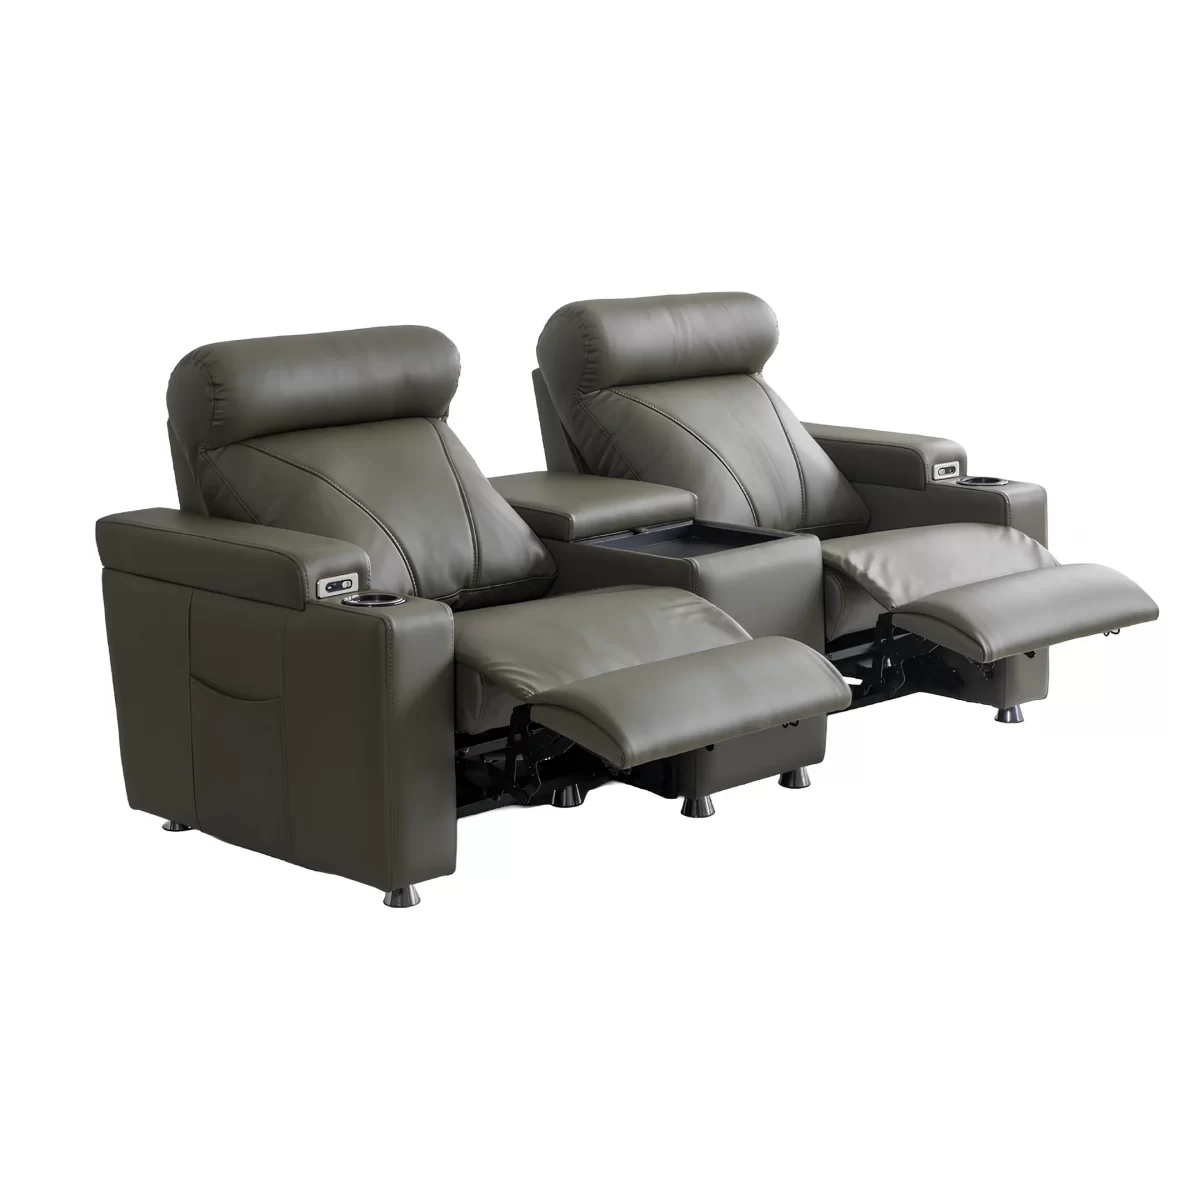 zero double reclining sofa for home theater seating cupholder usb electric